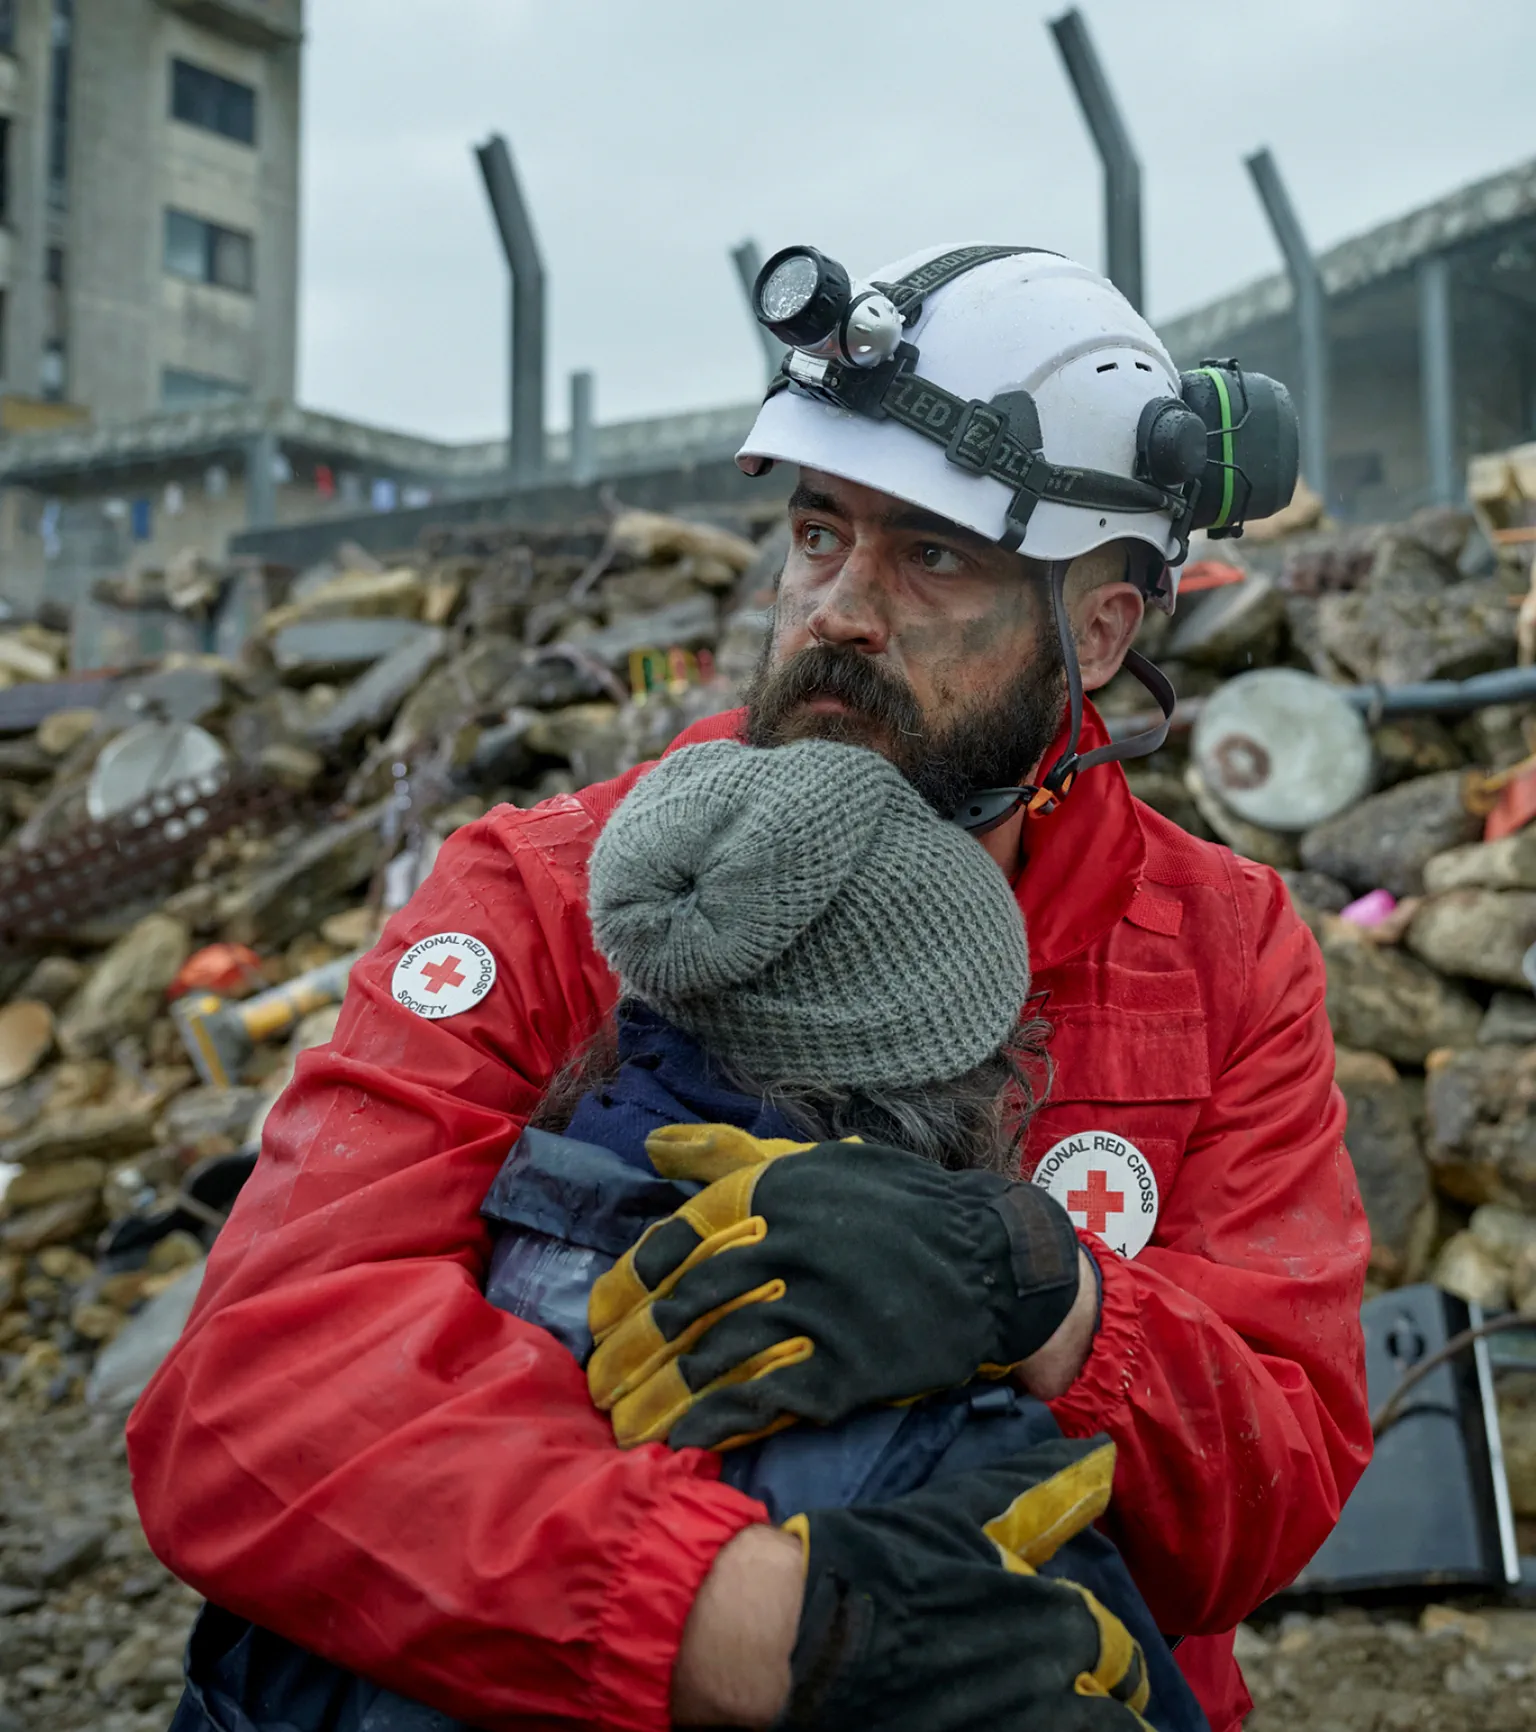 A Red Cross worker in red jacket and helmet hugs a person wearing a winter coat and hat, with rubble from a destroyed building in the background.